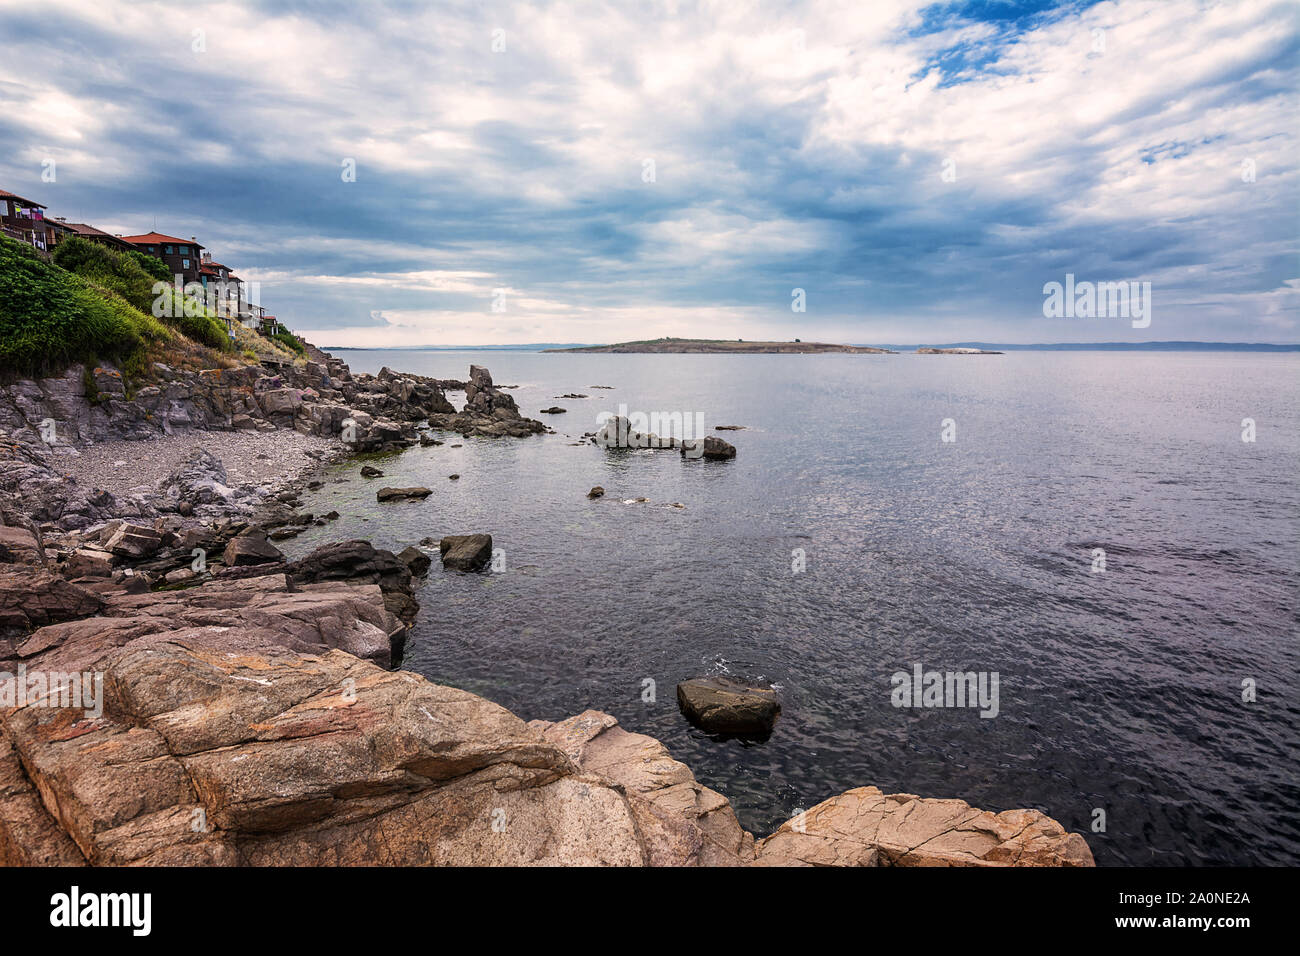 Part of the coast of Sozopol, a holiday place in Bulgaria Stock Photo